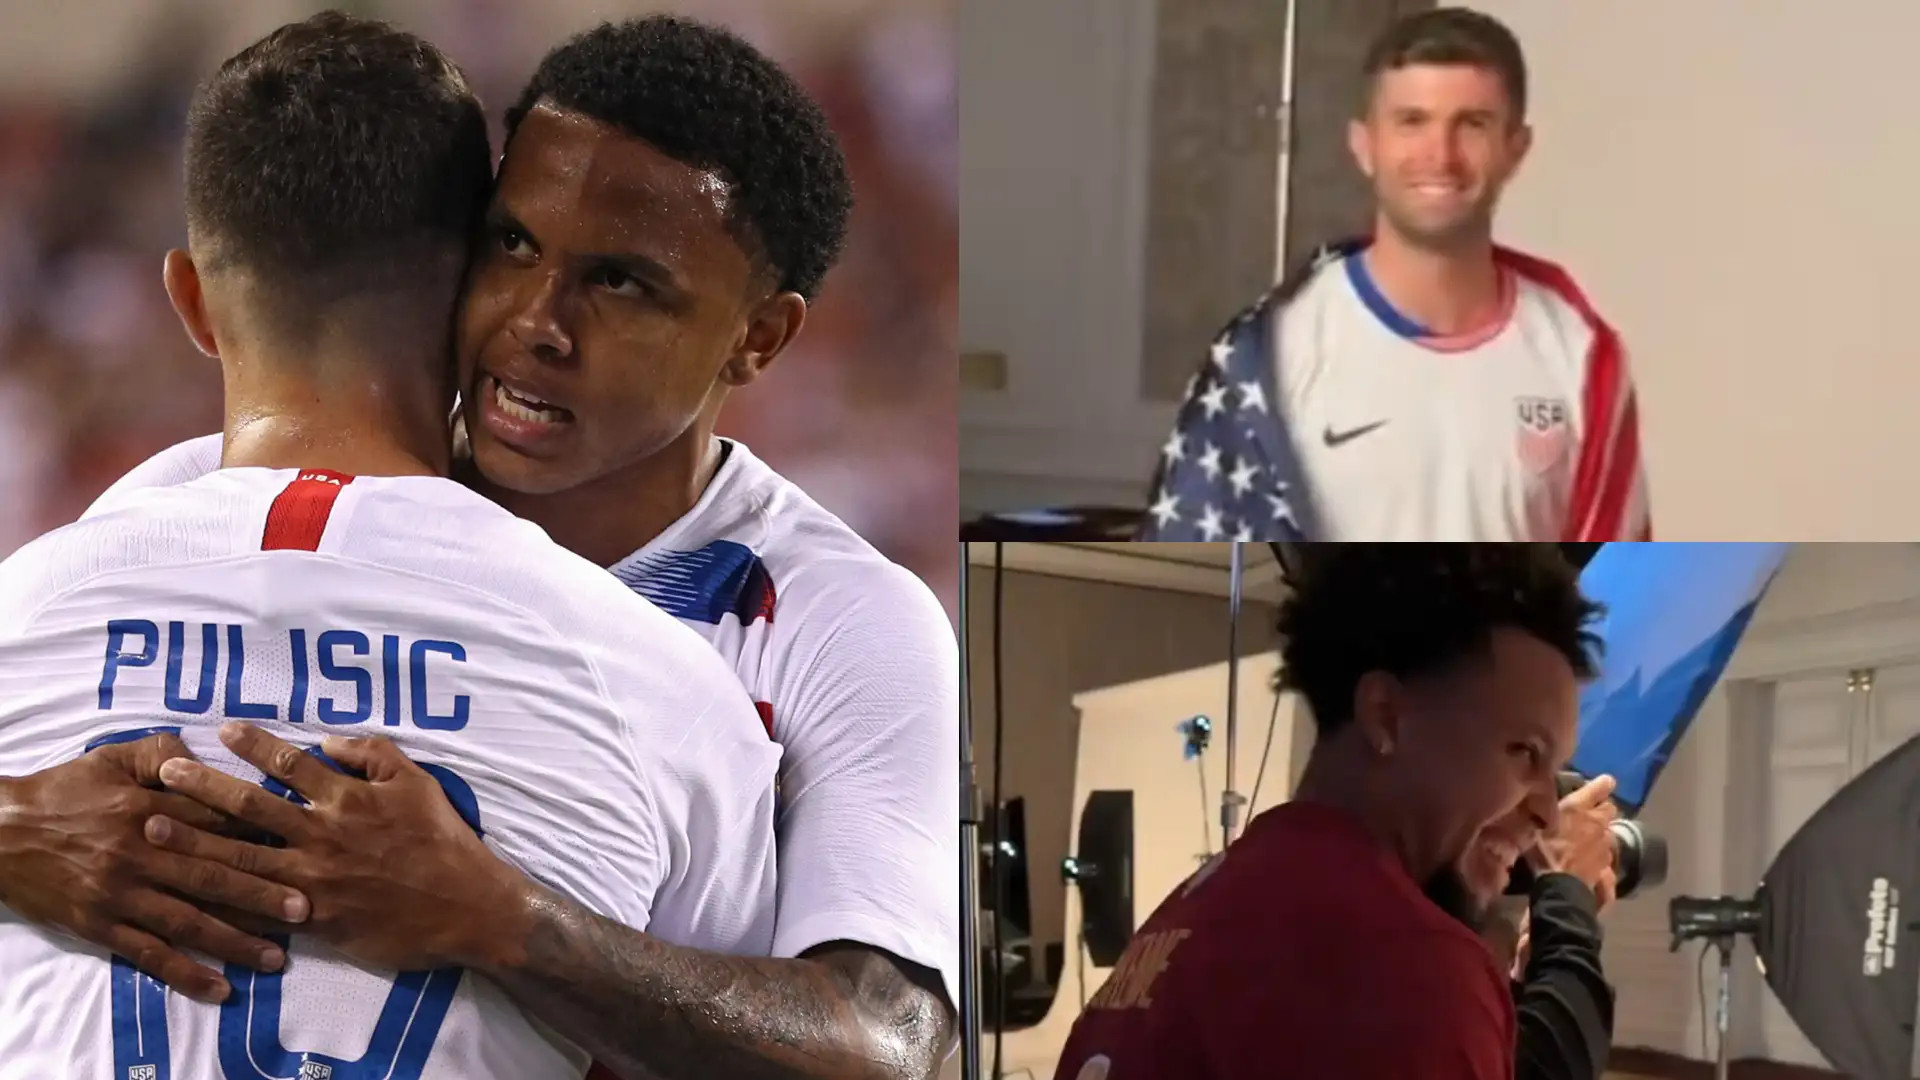 VIDEO: 'This is ridiculous!' - Christian Pulisic can't keep straight face after Weston McKennie gatecrashes USMNT photoshoot ahead of Copa America